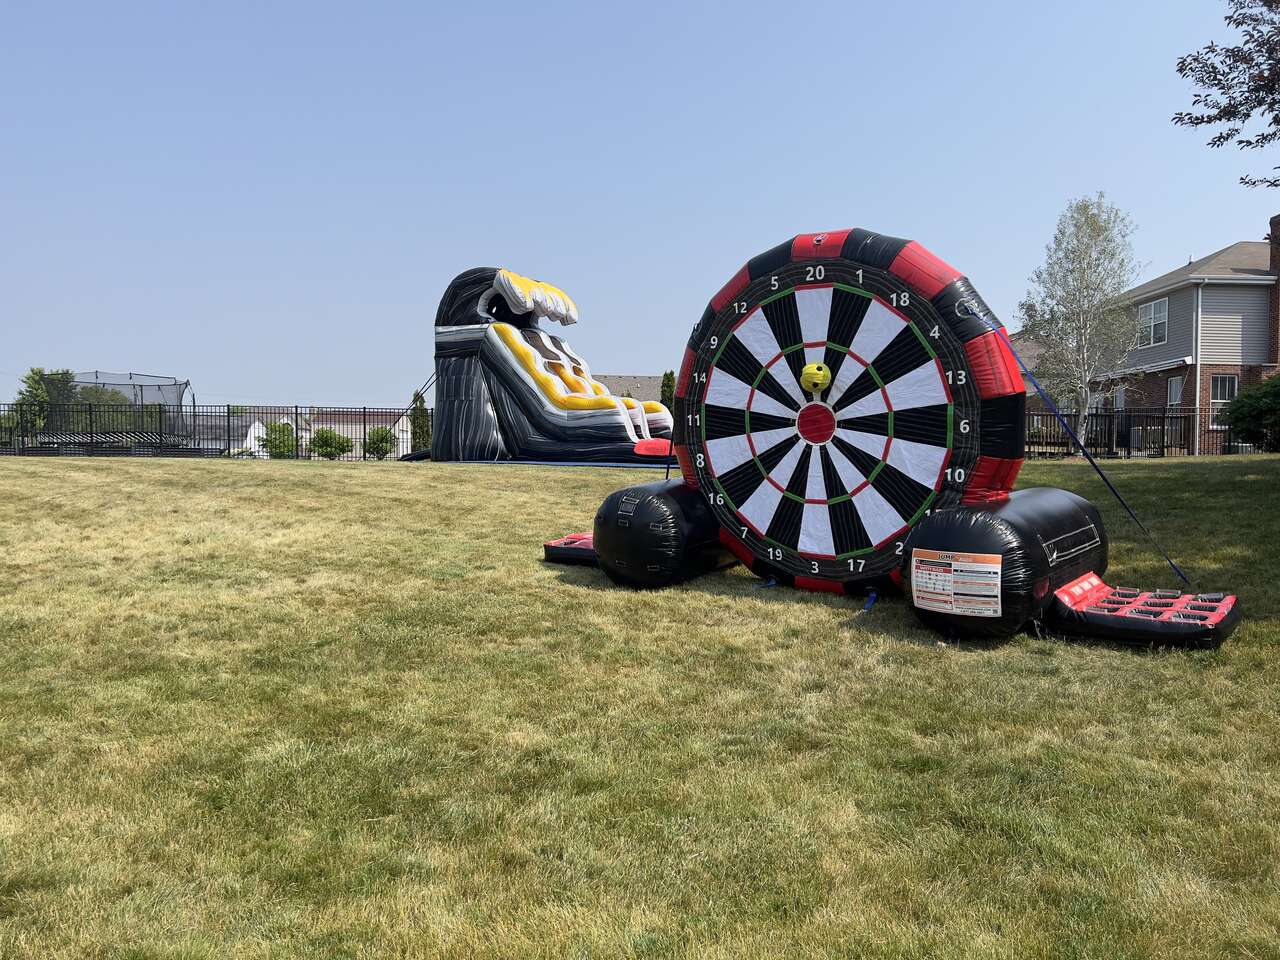 inflatable rentals by Fun Bounces Rental in Dwight Il 60420